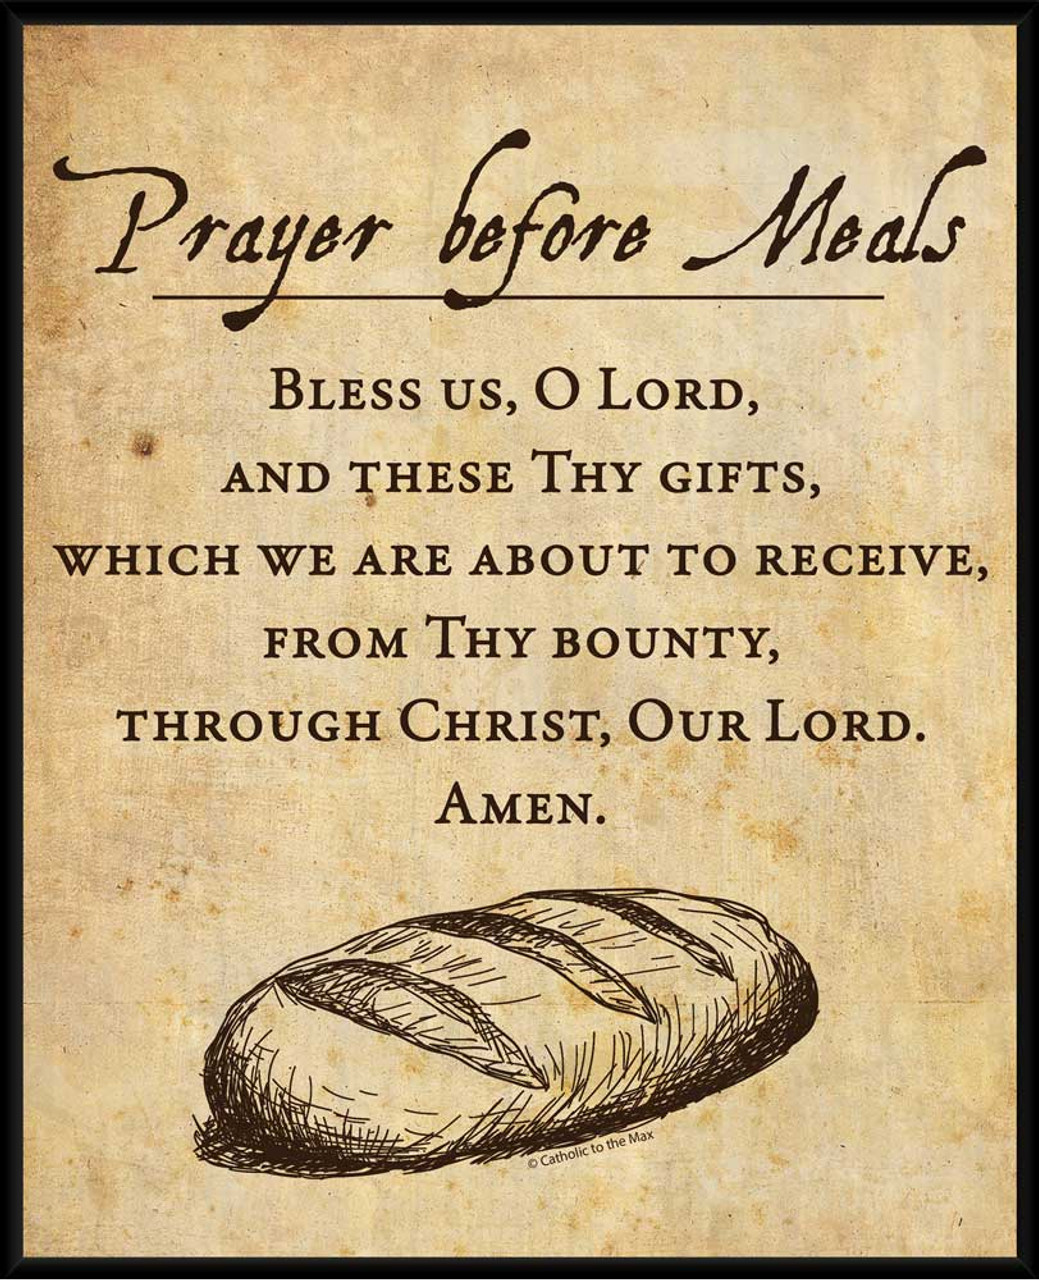 prayer-before-meals-wall-plaque-catholic-to-the-max-online-catholic